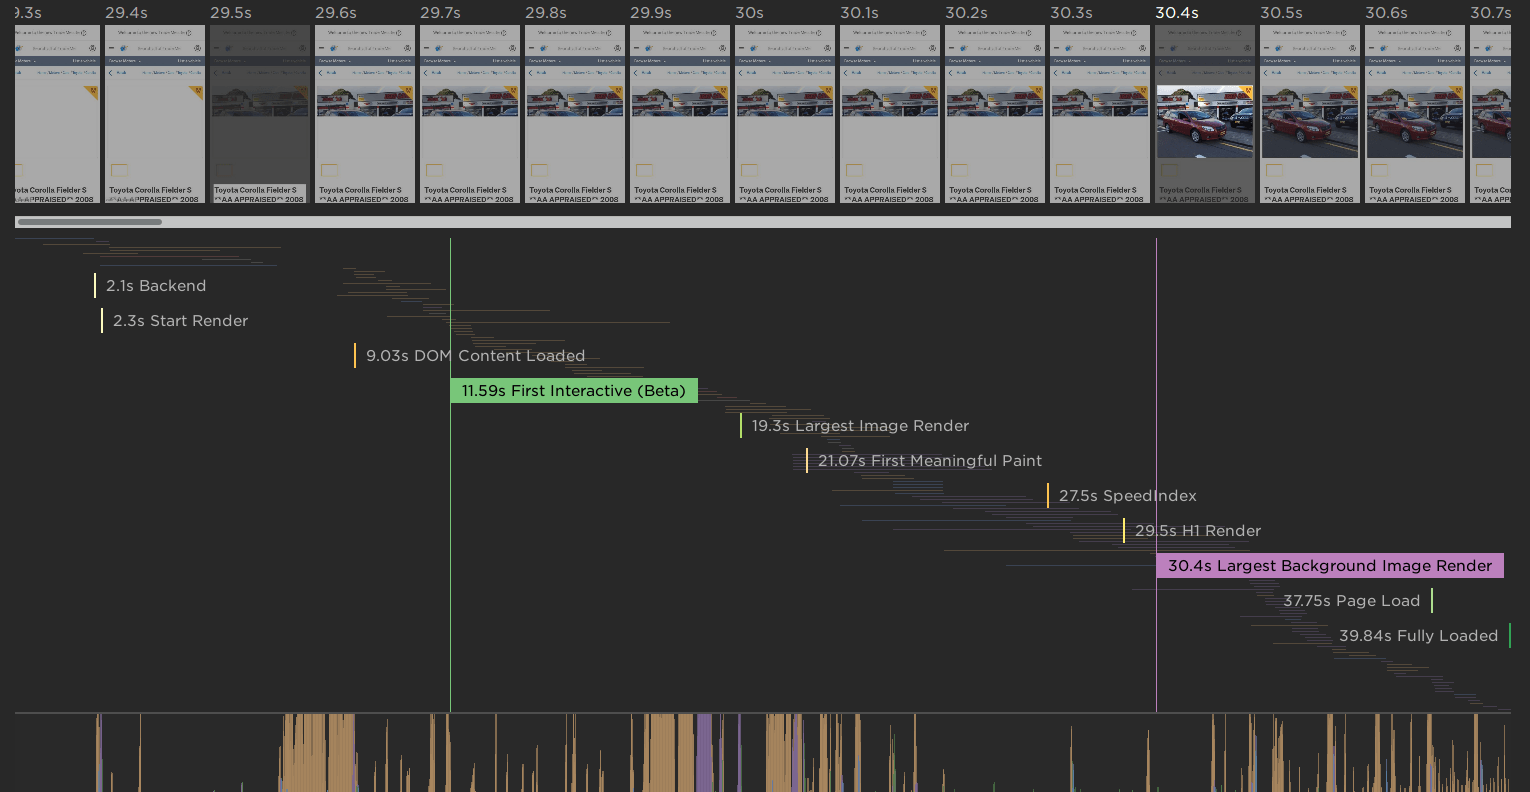 A waterfall chart showing the timeline of a TradeMe Preview listing page